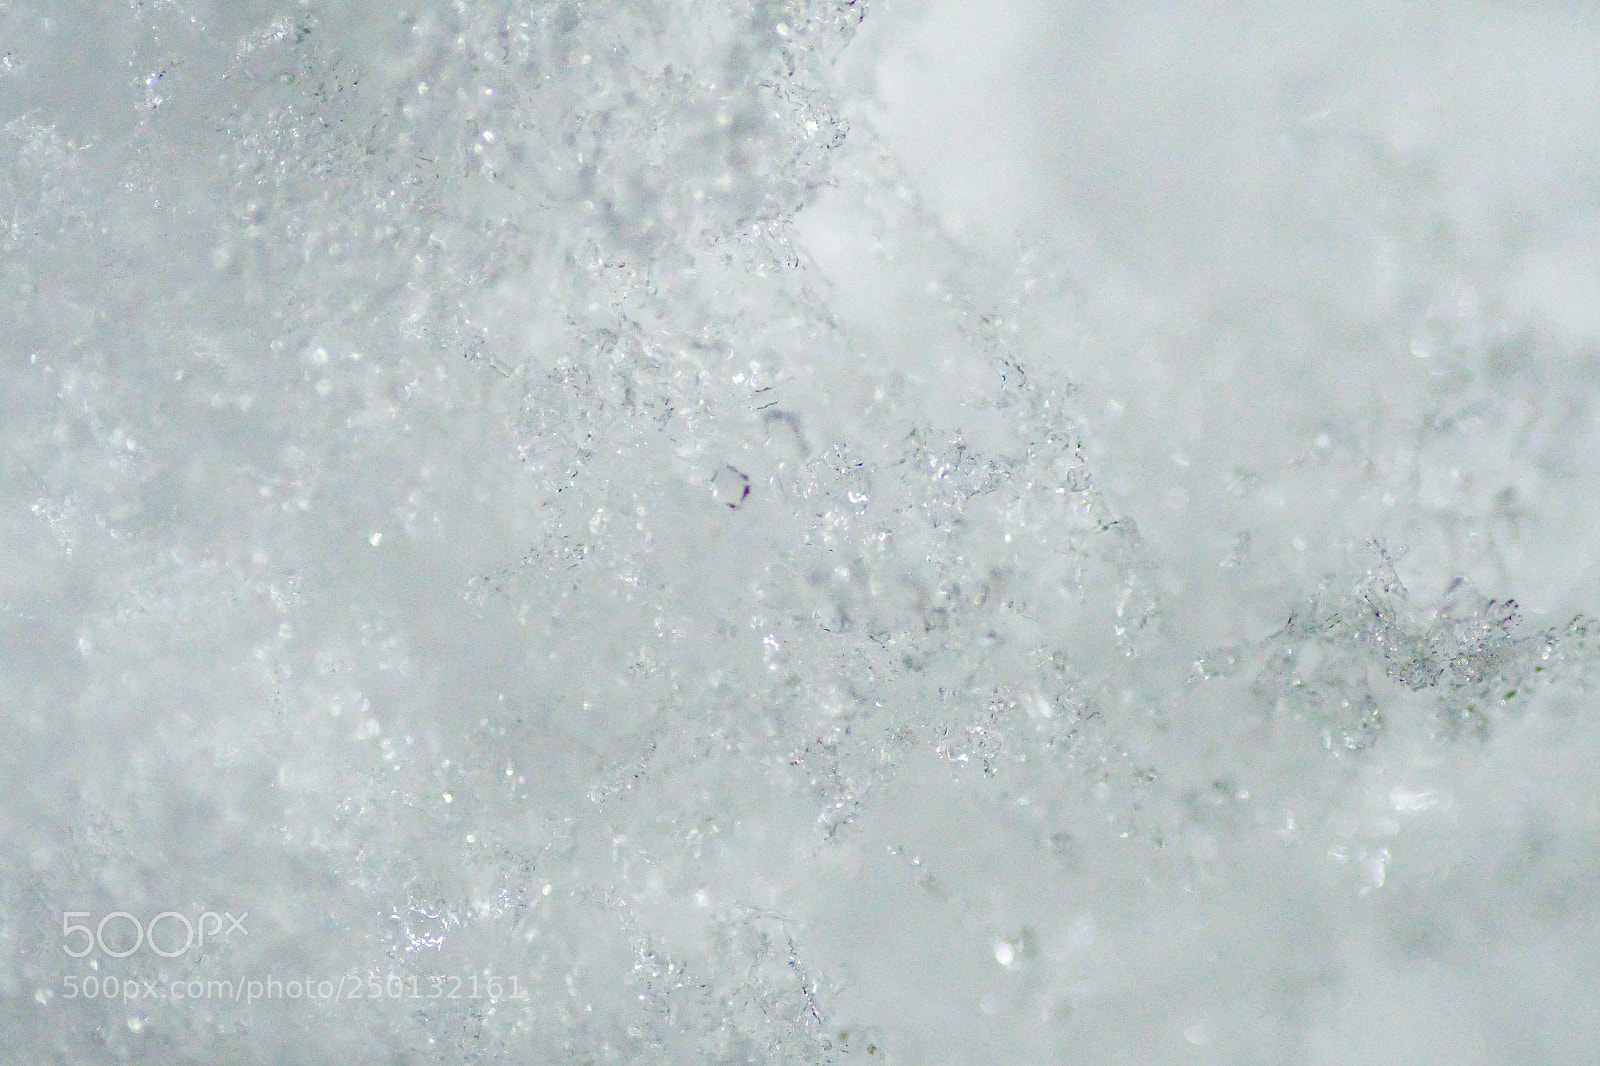 Nikon D500 sample photo. In the frozen crystals photography